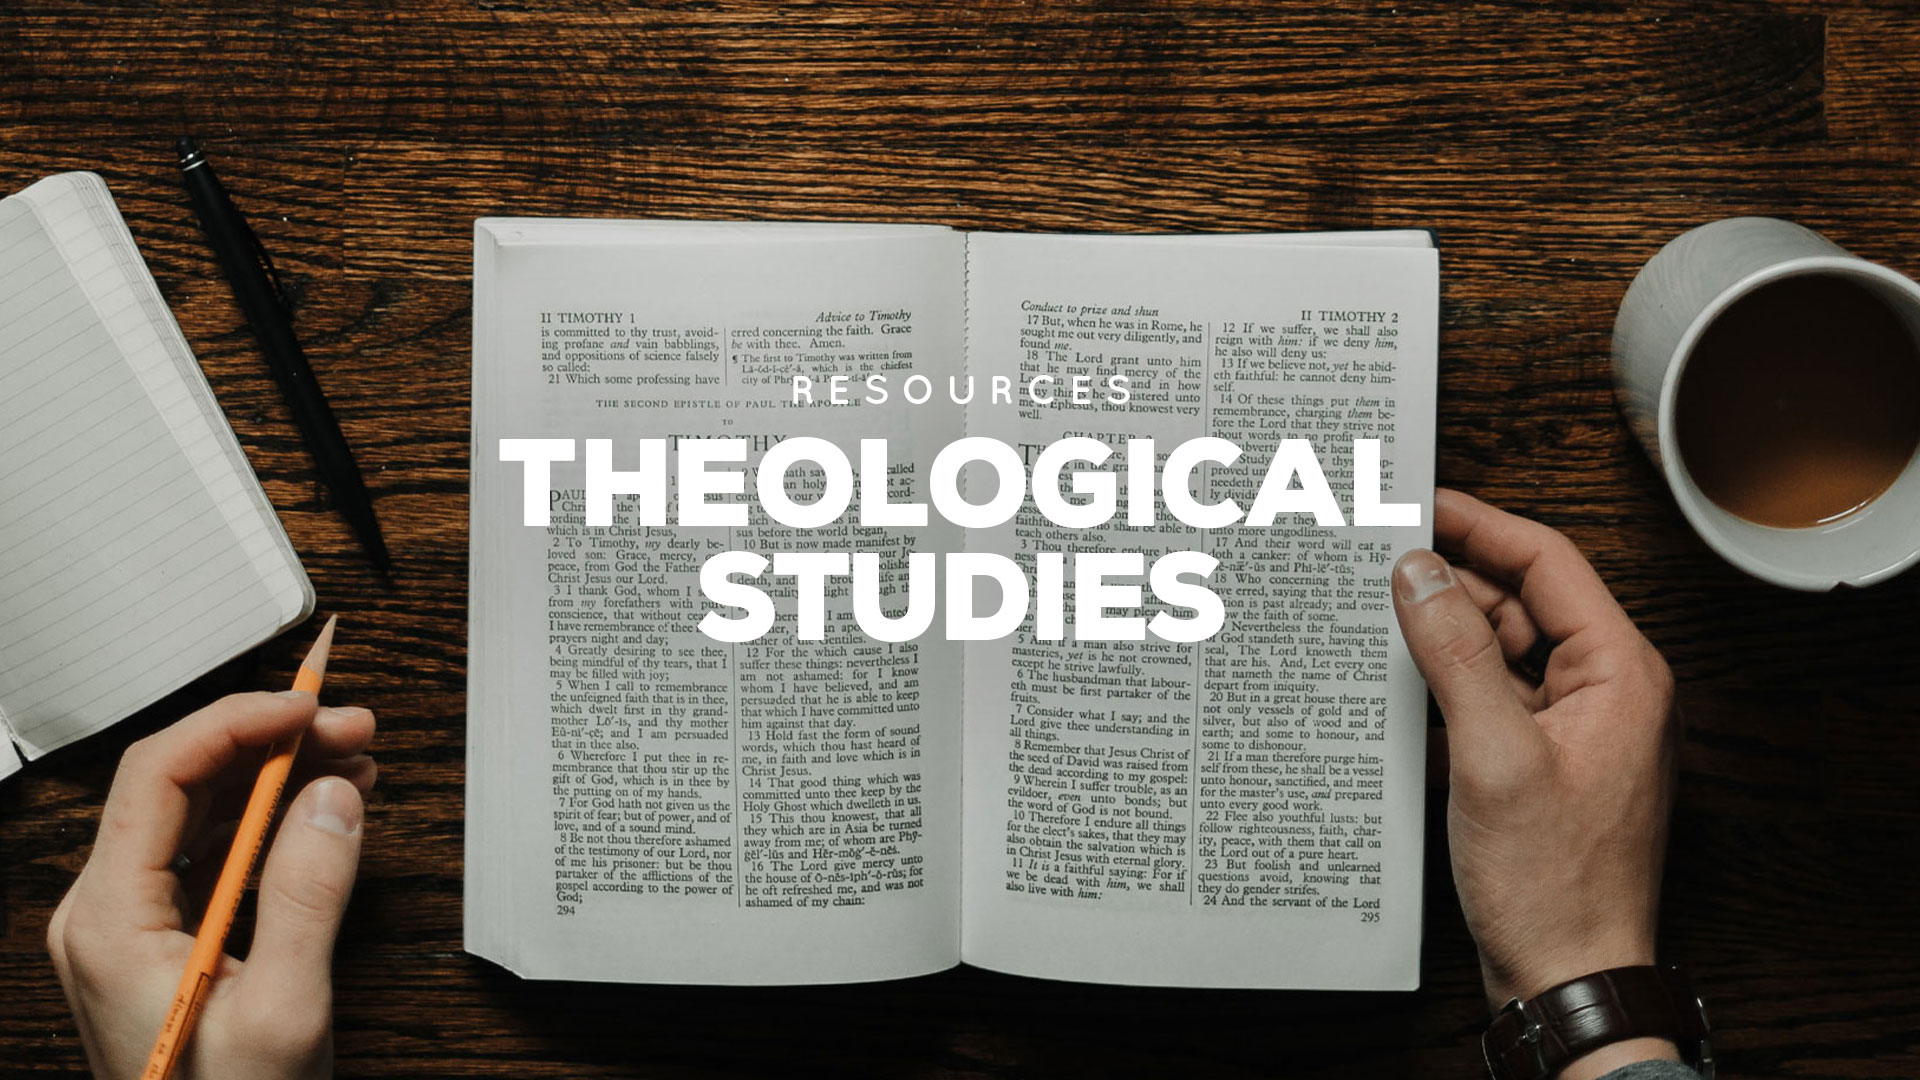 Image for 'Theological Programmes', which provides the various Four12 theological programmes